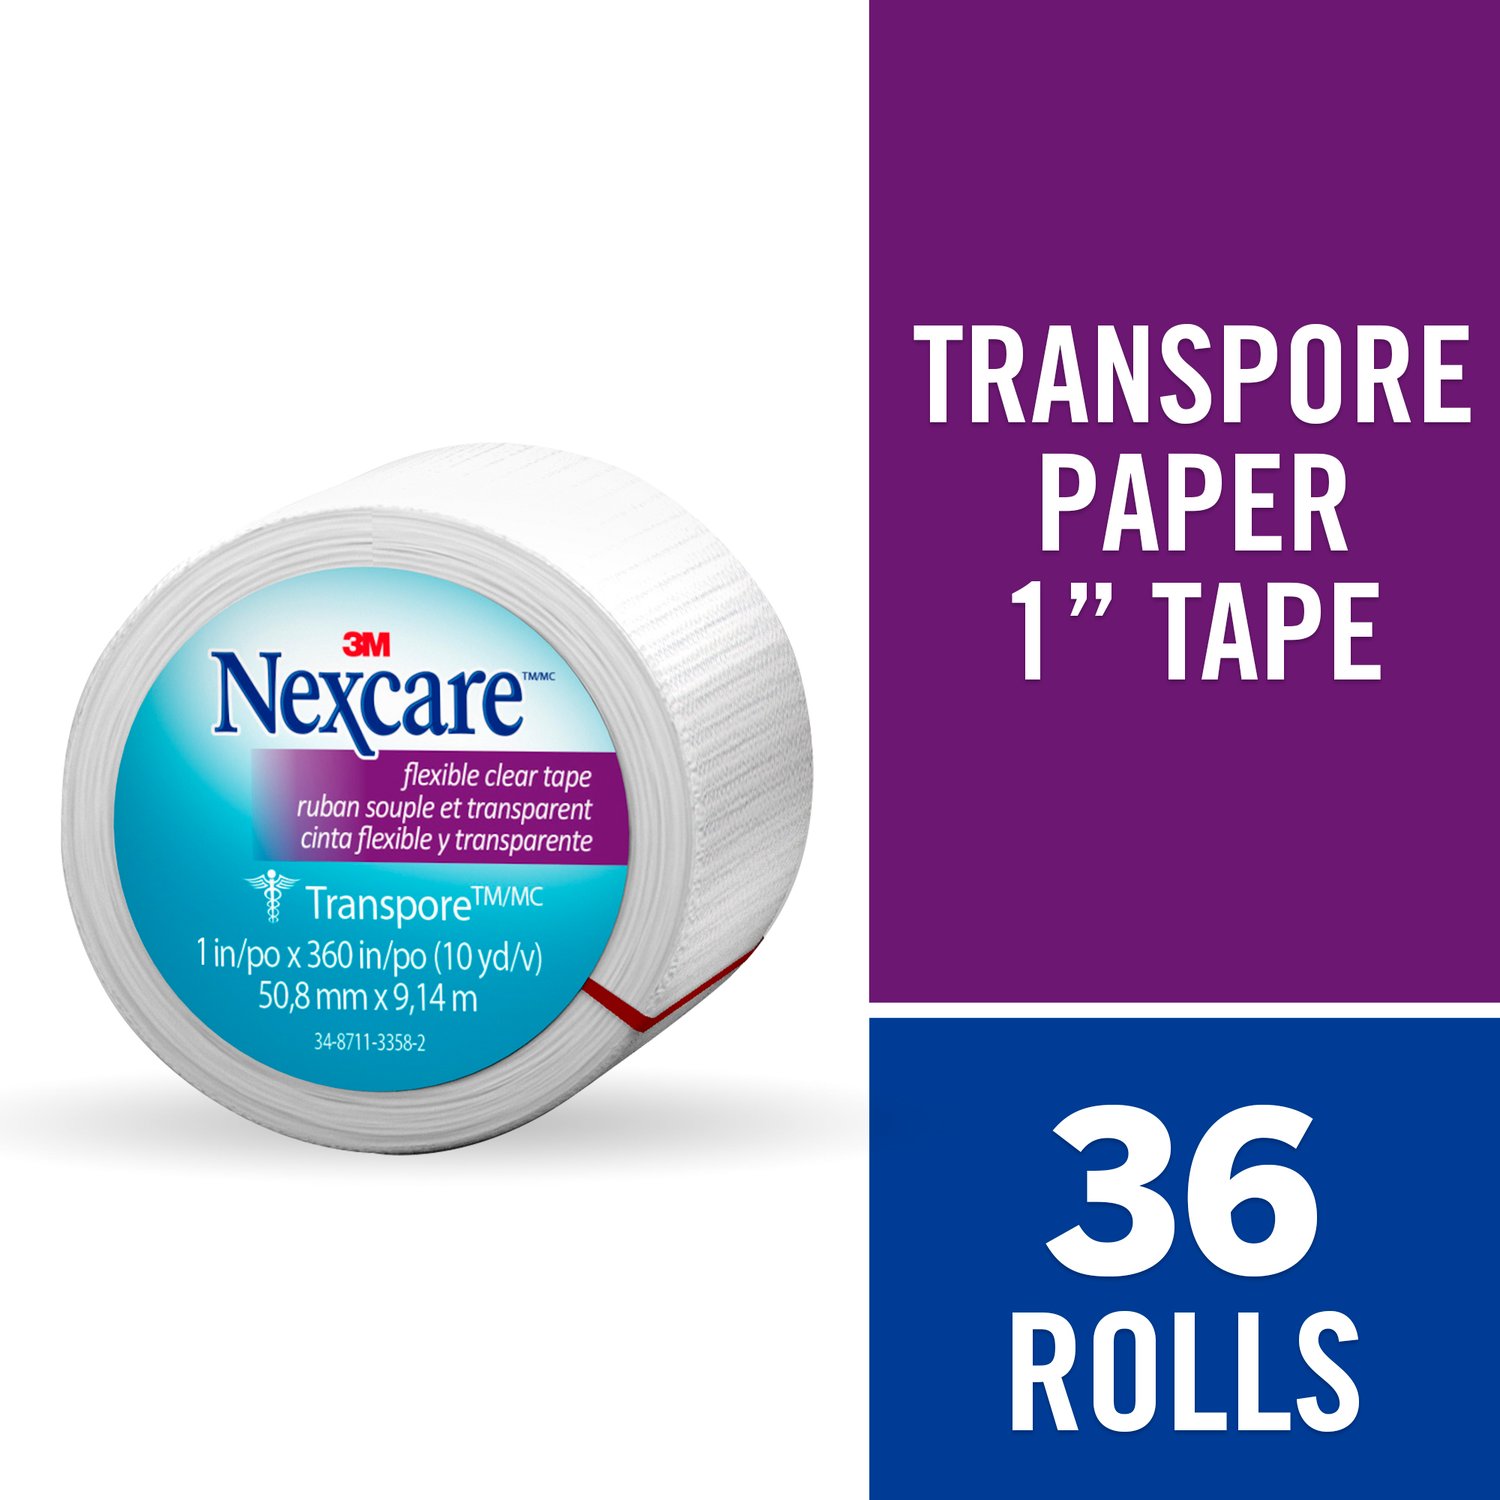 7000052481 - Nexcare Transpore Clear First Aid Tape, 527-P1, 1 in x 10 yds, Wrapped